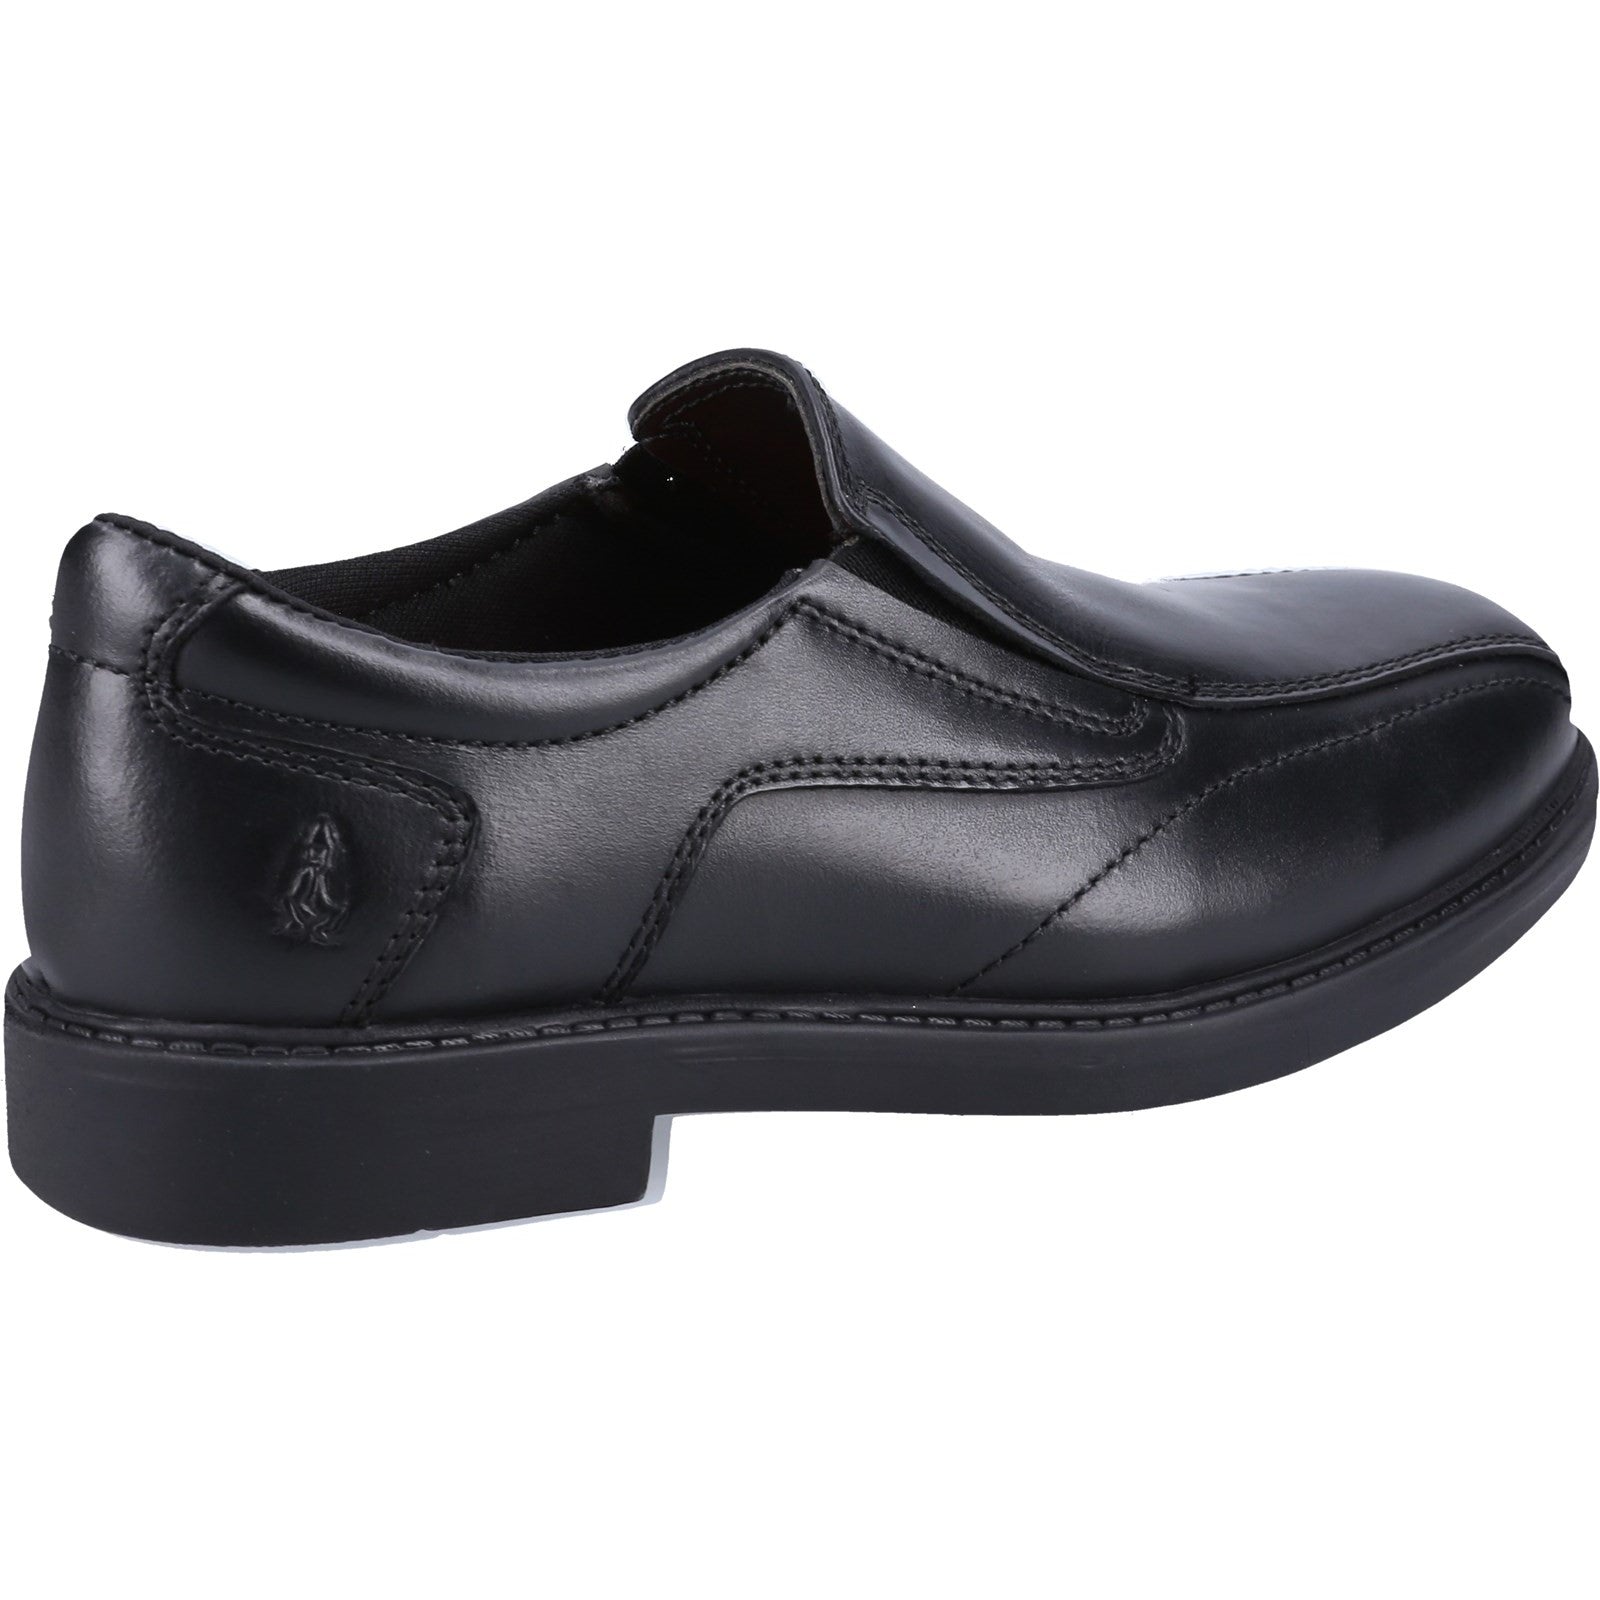 Hush Puppies Boys Toby Leather Slip On School Shoes - Black